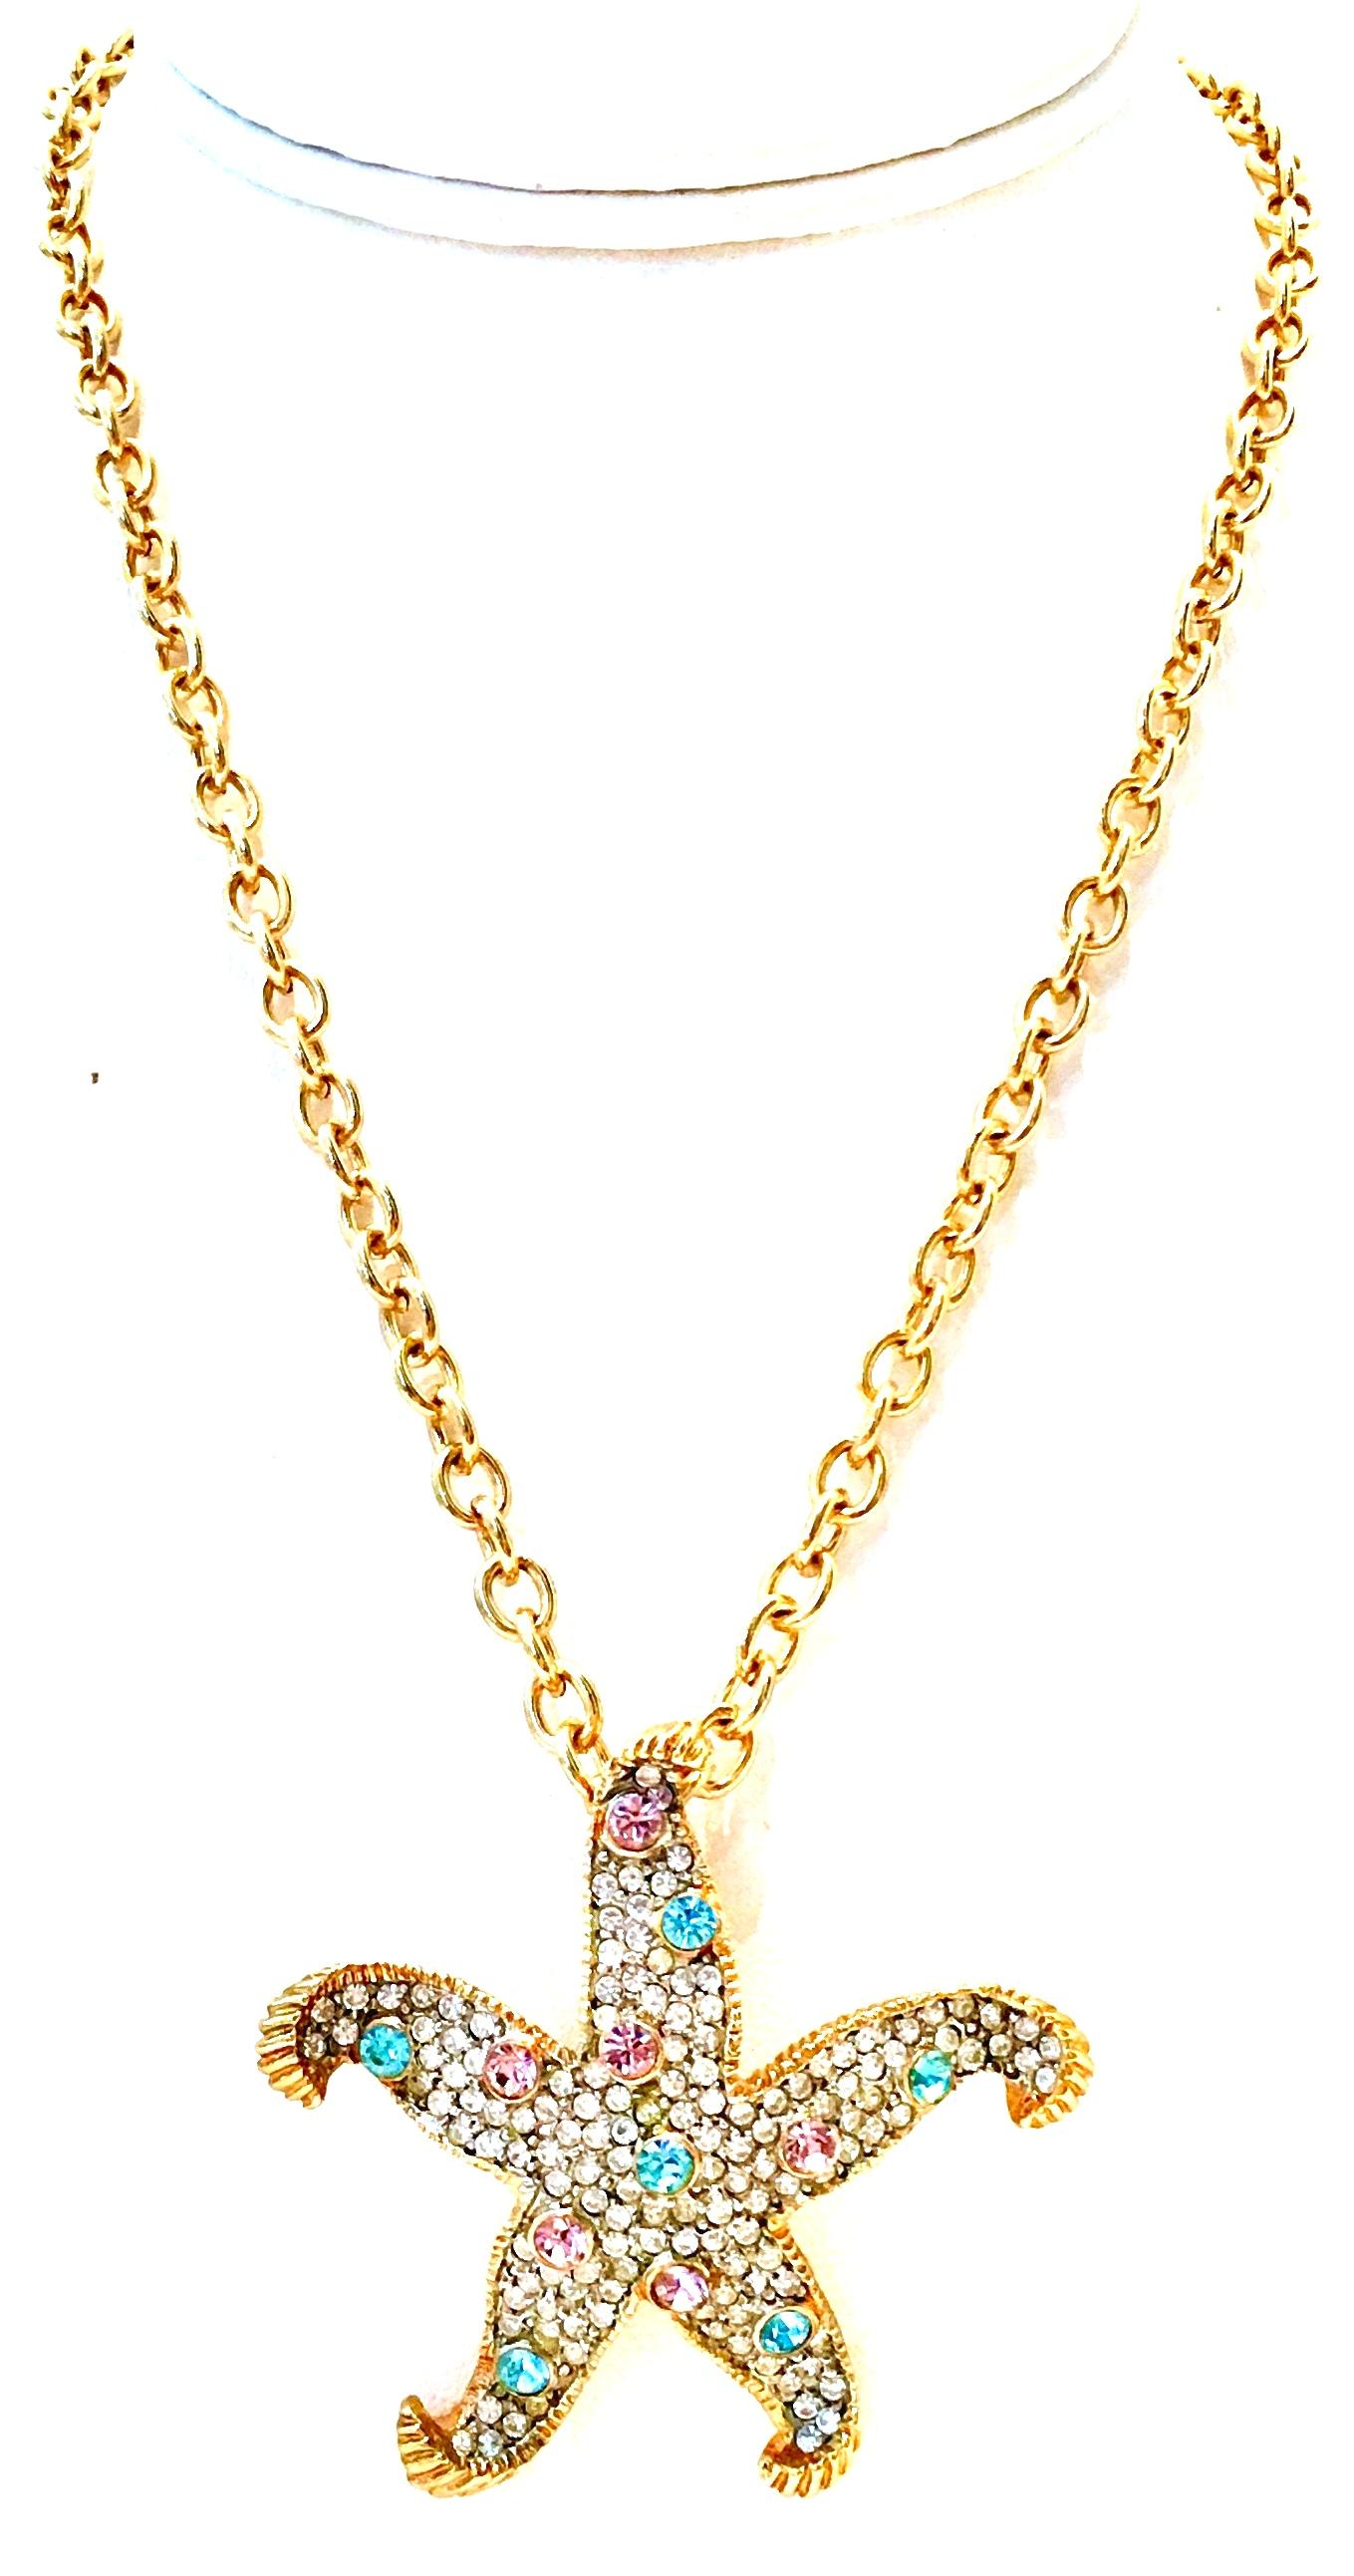 21st Century Gold Plate & Swarovski Crystal Starfish Pendant Necklace By, Kenneth Lane.
This gold plate brilliant pave set Swarovski crystal starfish necklace features and abstract and dimensional starfish pendant of approximately, 2.25